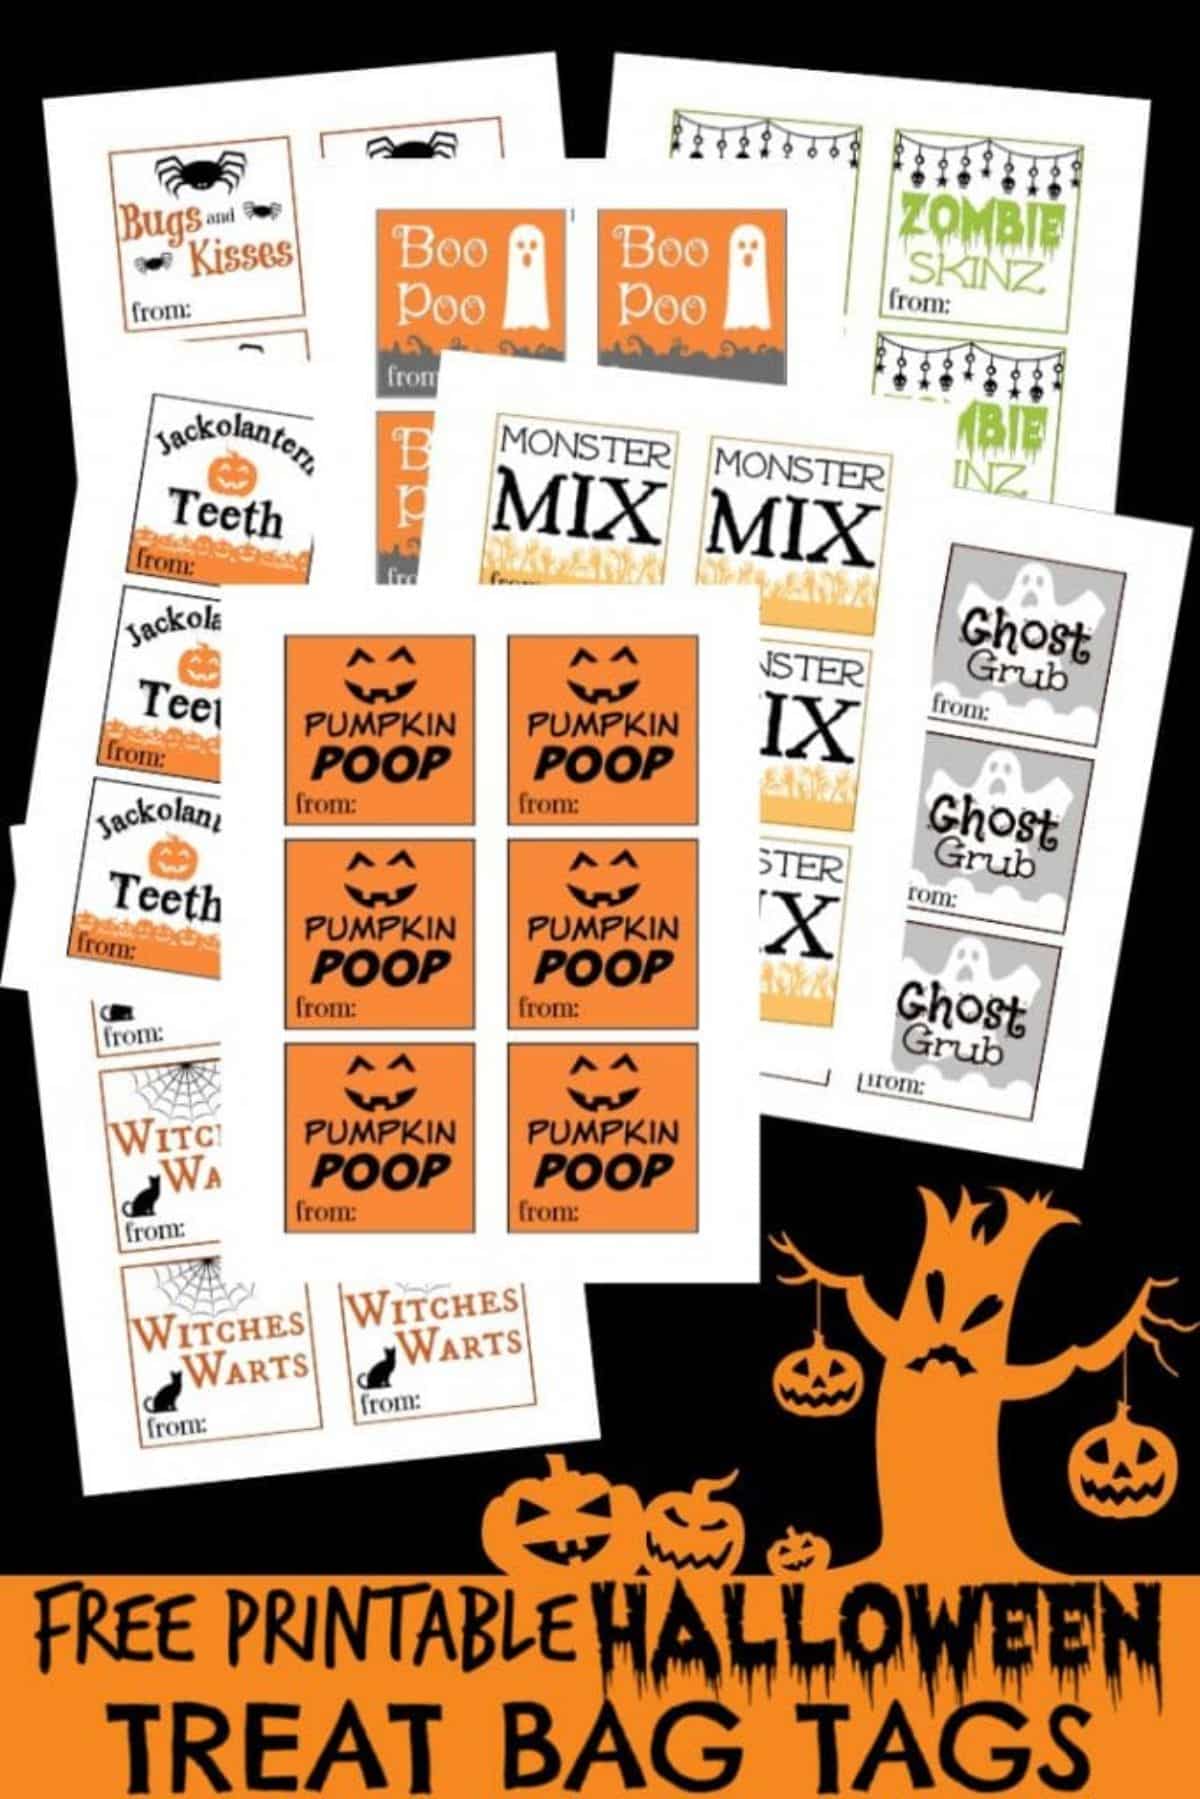 Images printable Halloween tags for goodie bags.